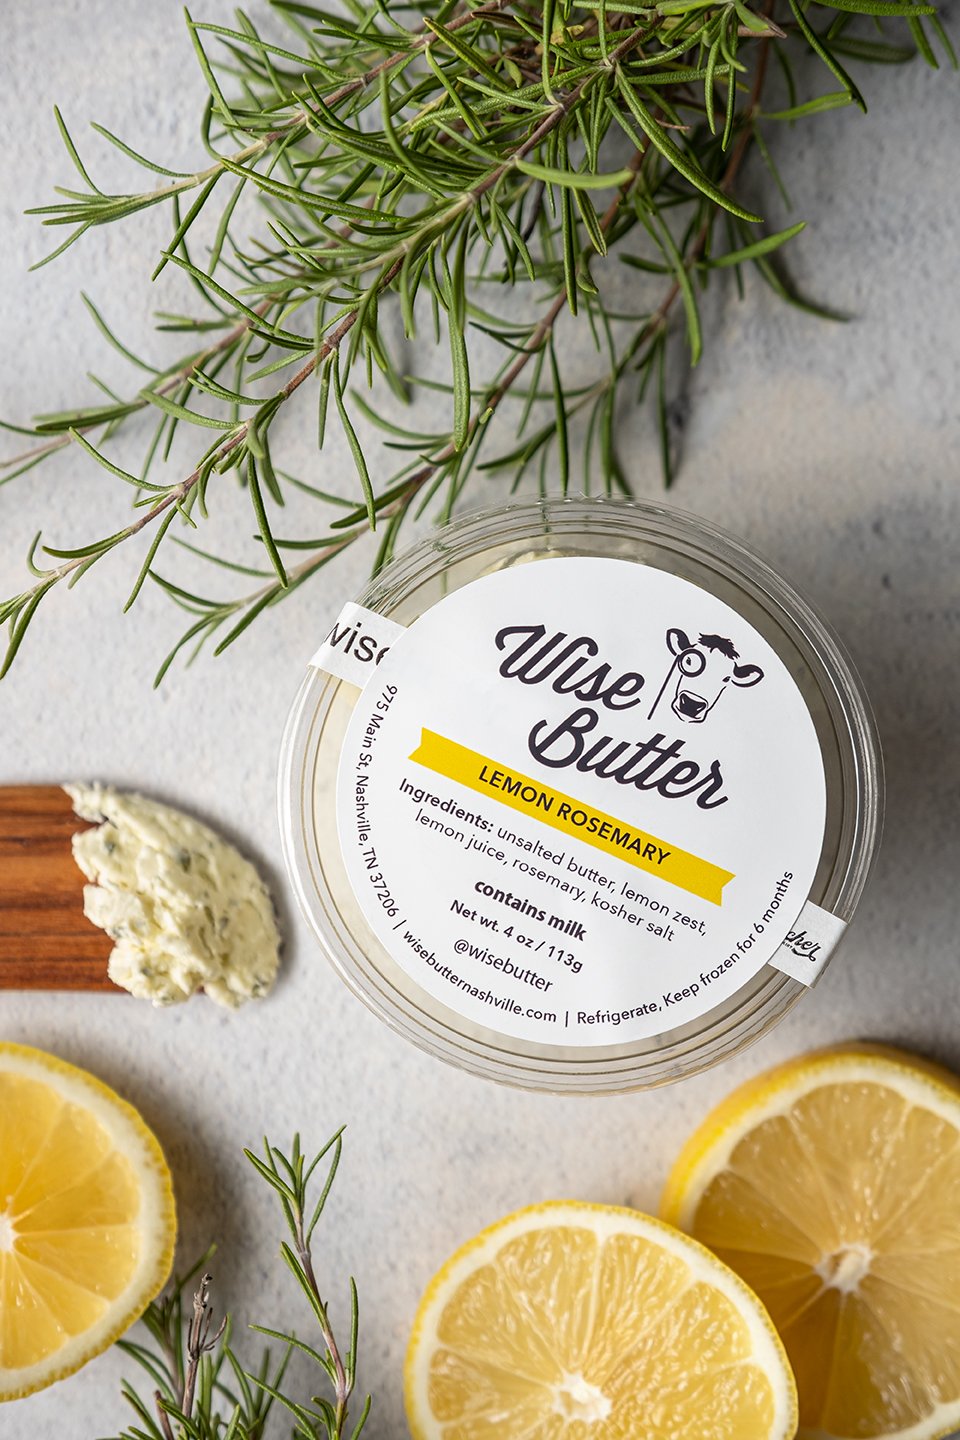 Hand Blended Butters by Wise Butter